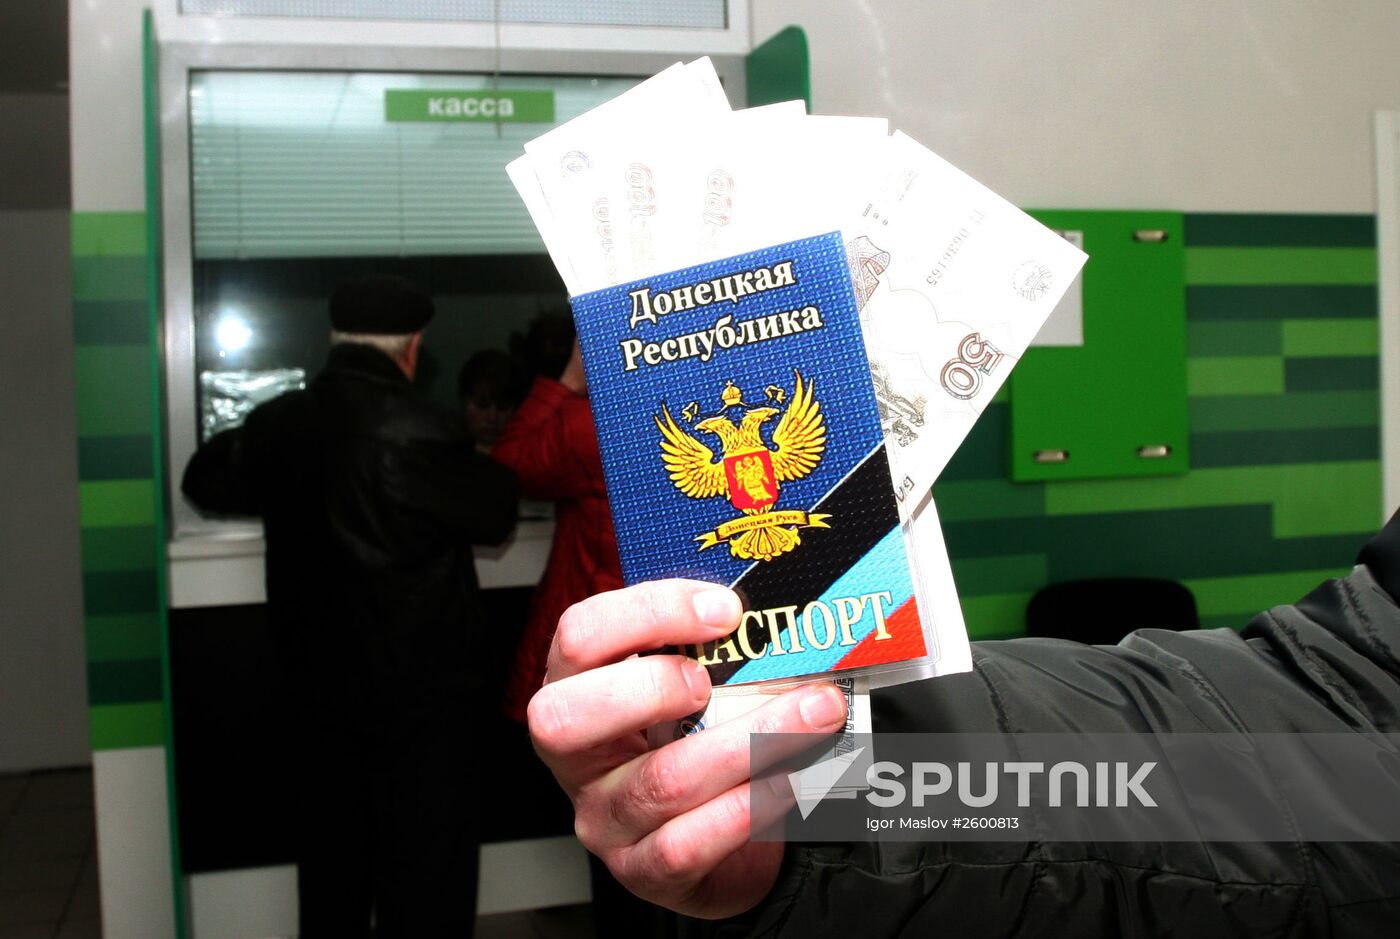 Pensions paid in rubles in DPR